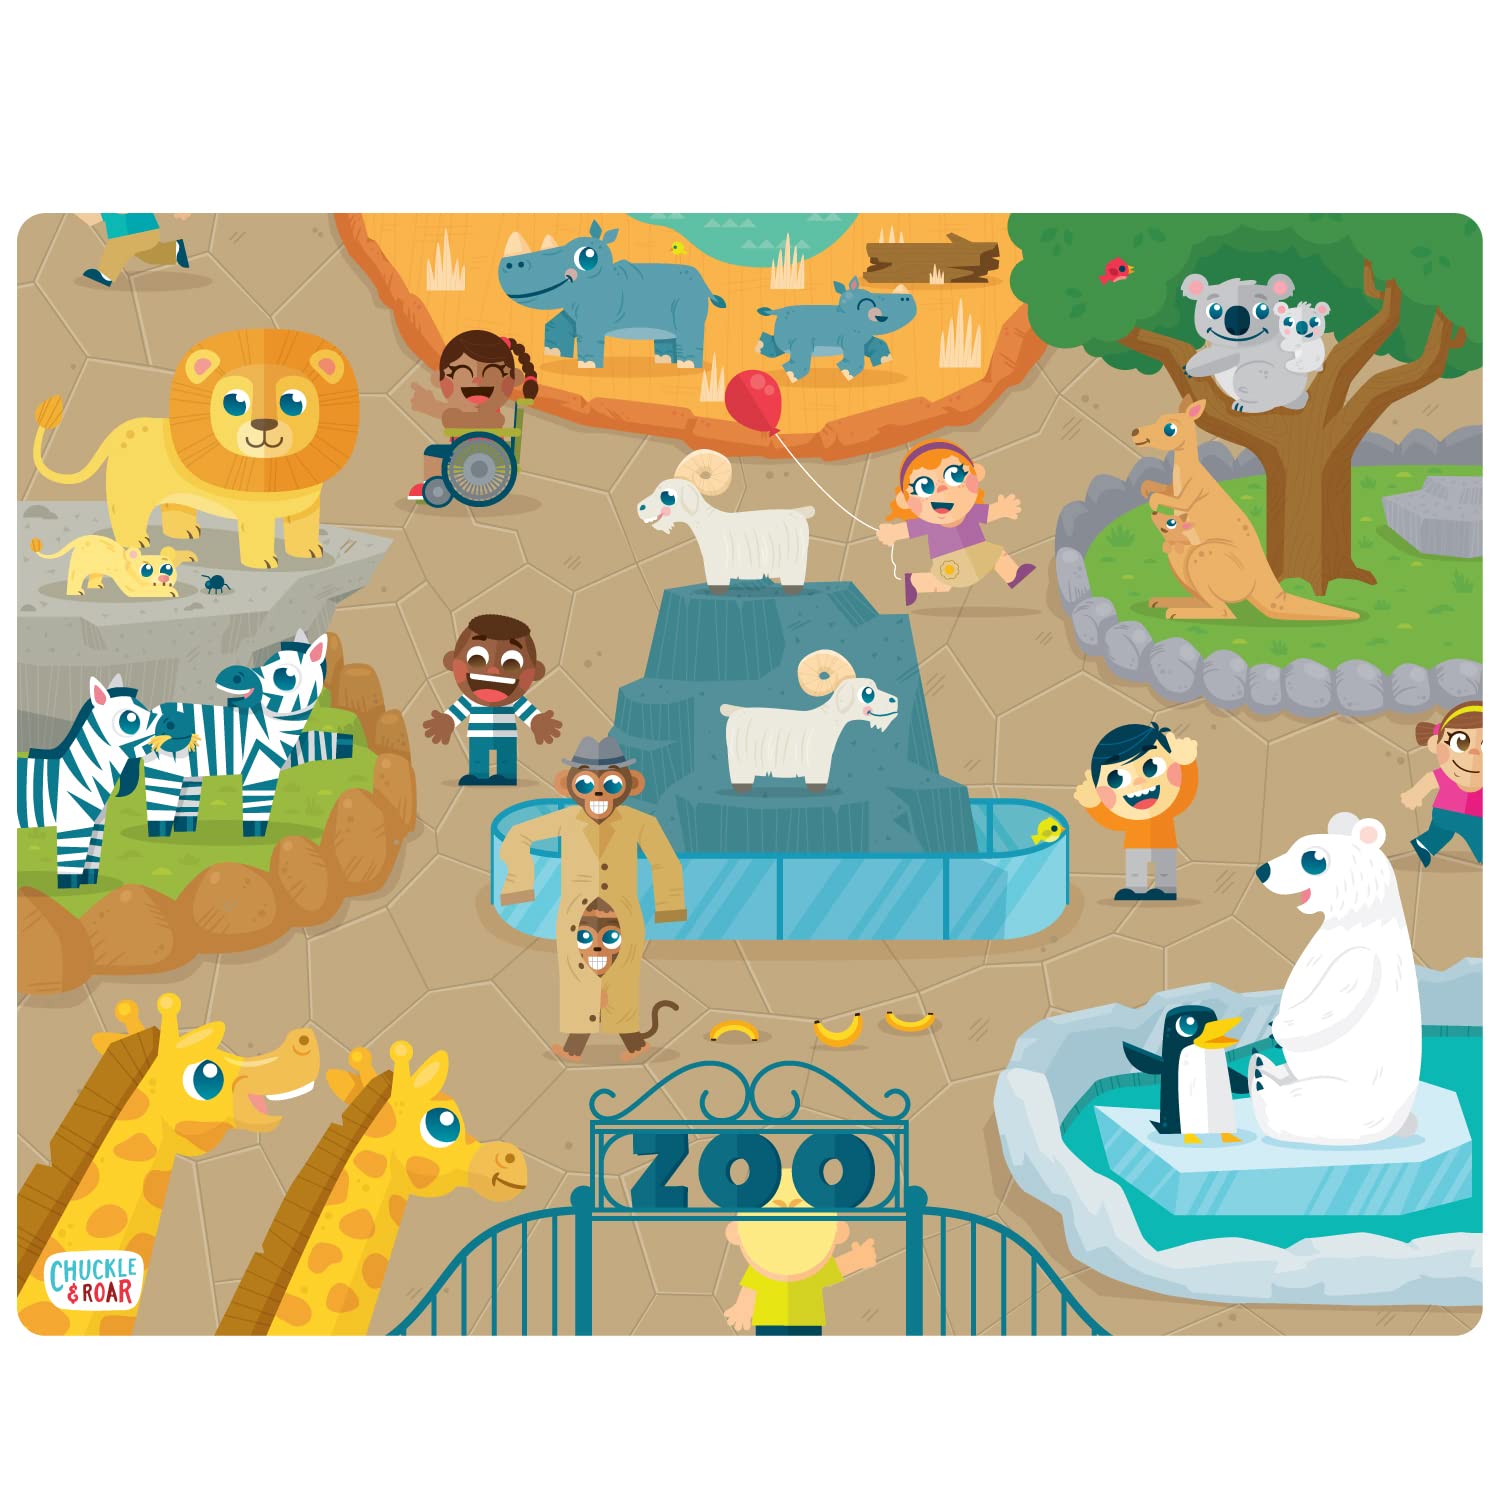 Chuckle & Roar - 4 Pack Tray Puzzles - Farm, Dinosaurs, Jungle, and Zoo - Larger Pieces Designed for Preschool Hands - 36 & 48 PC Tray Puzzles